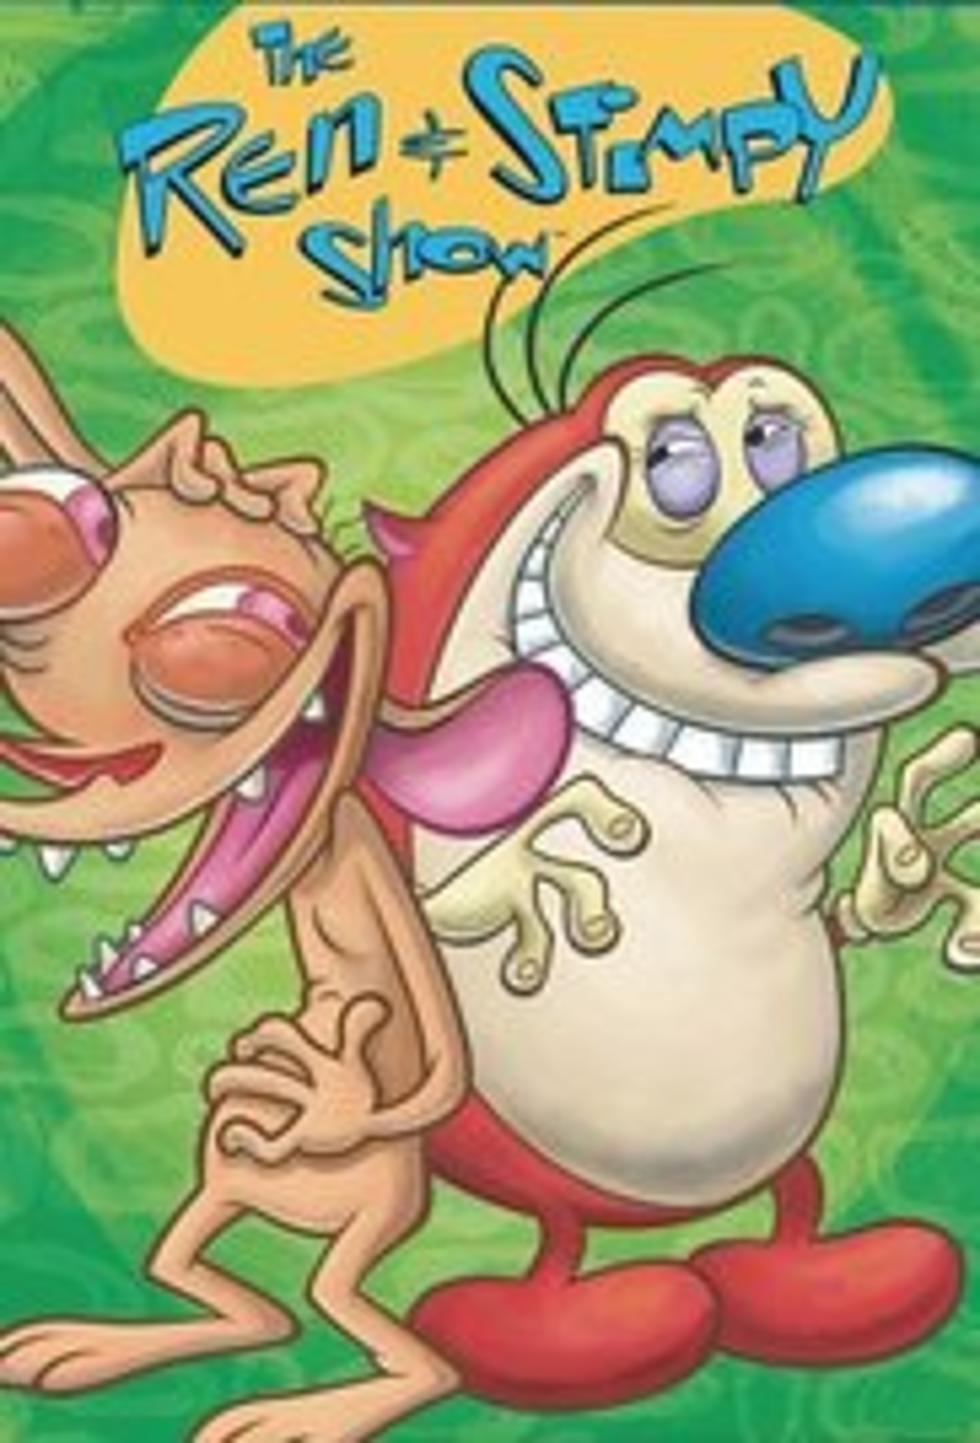 How Was ‘Ren And Stimpy’ A Kid’s Show?